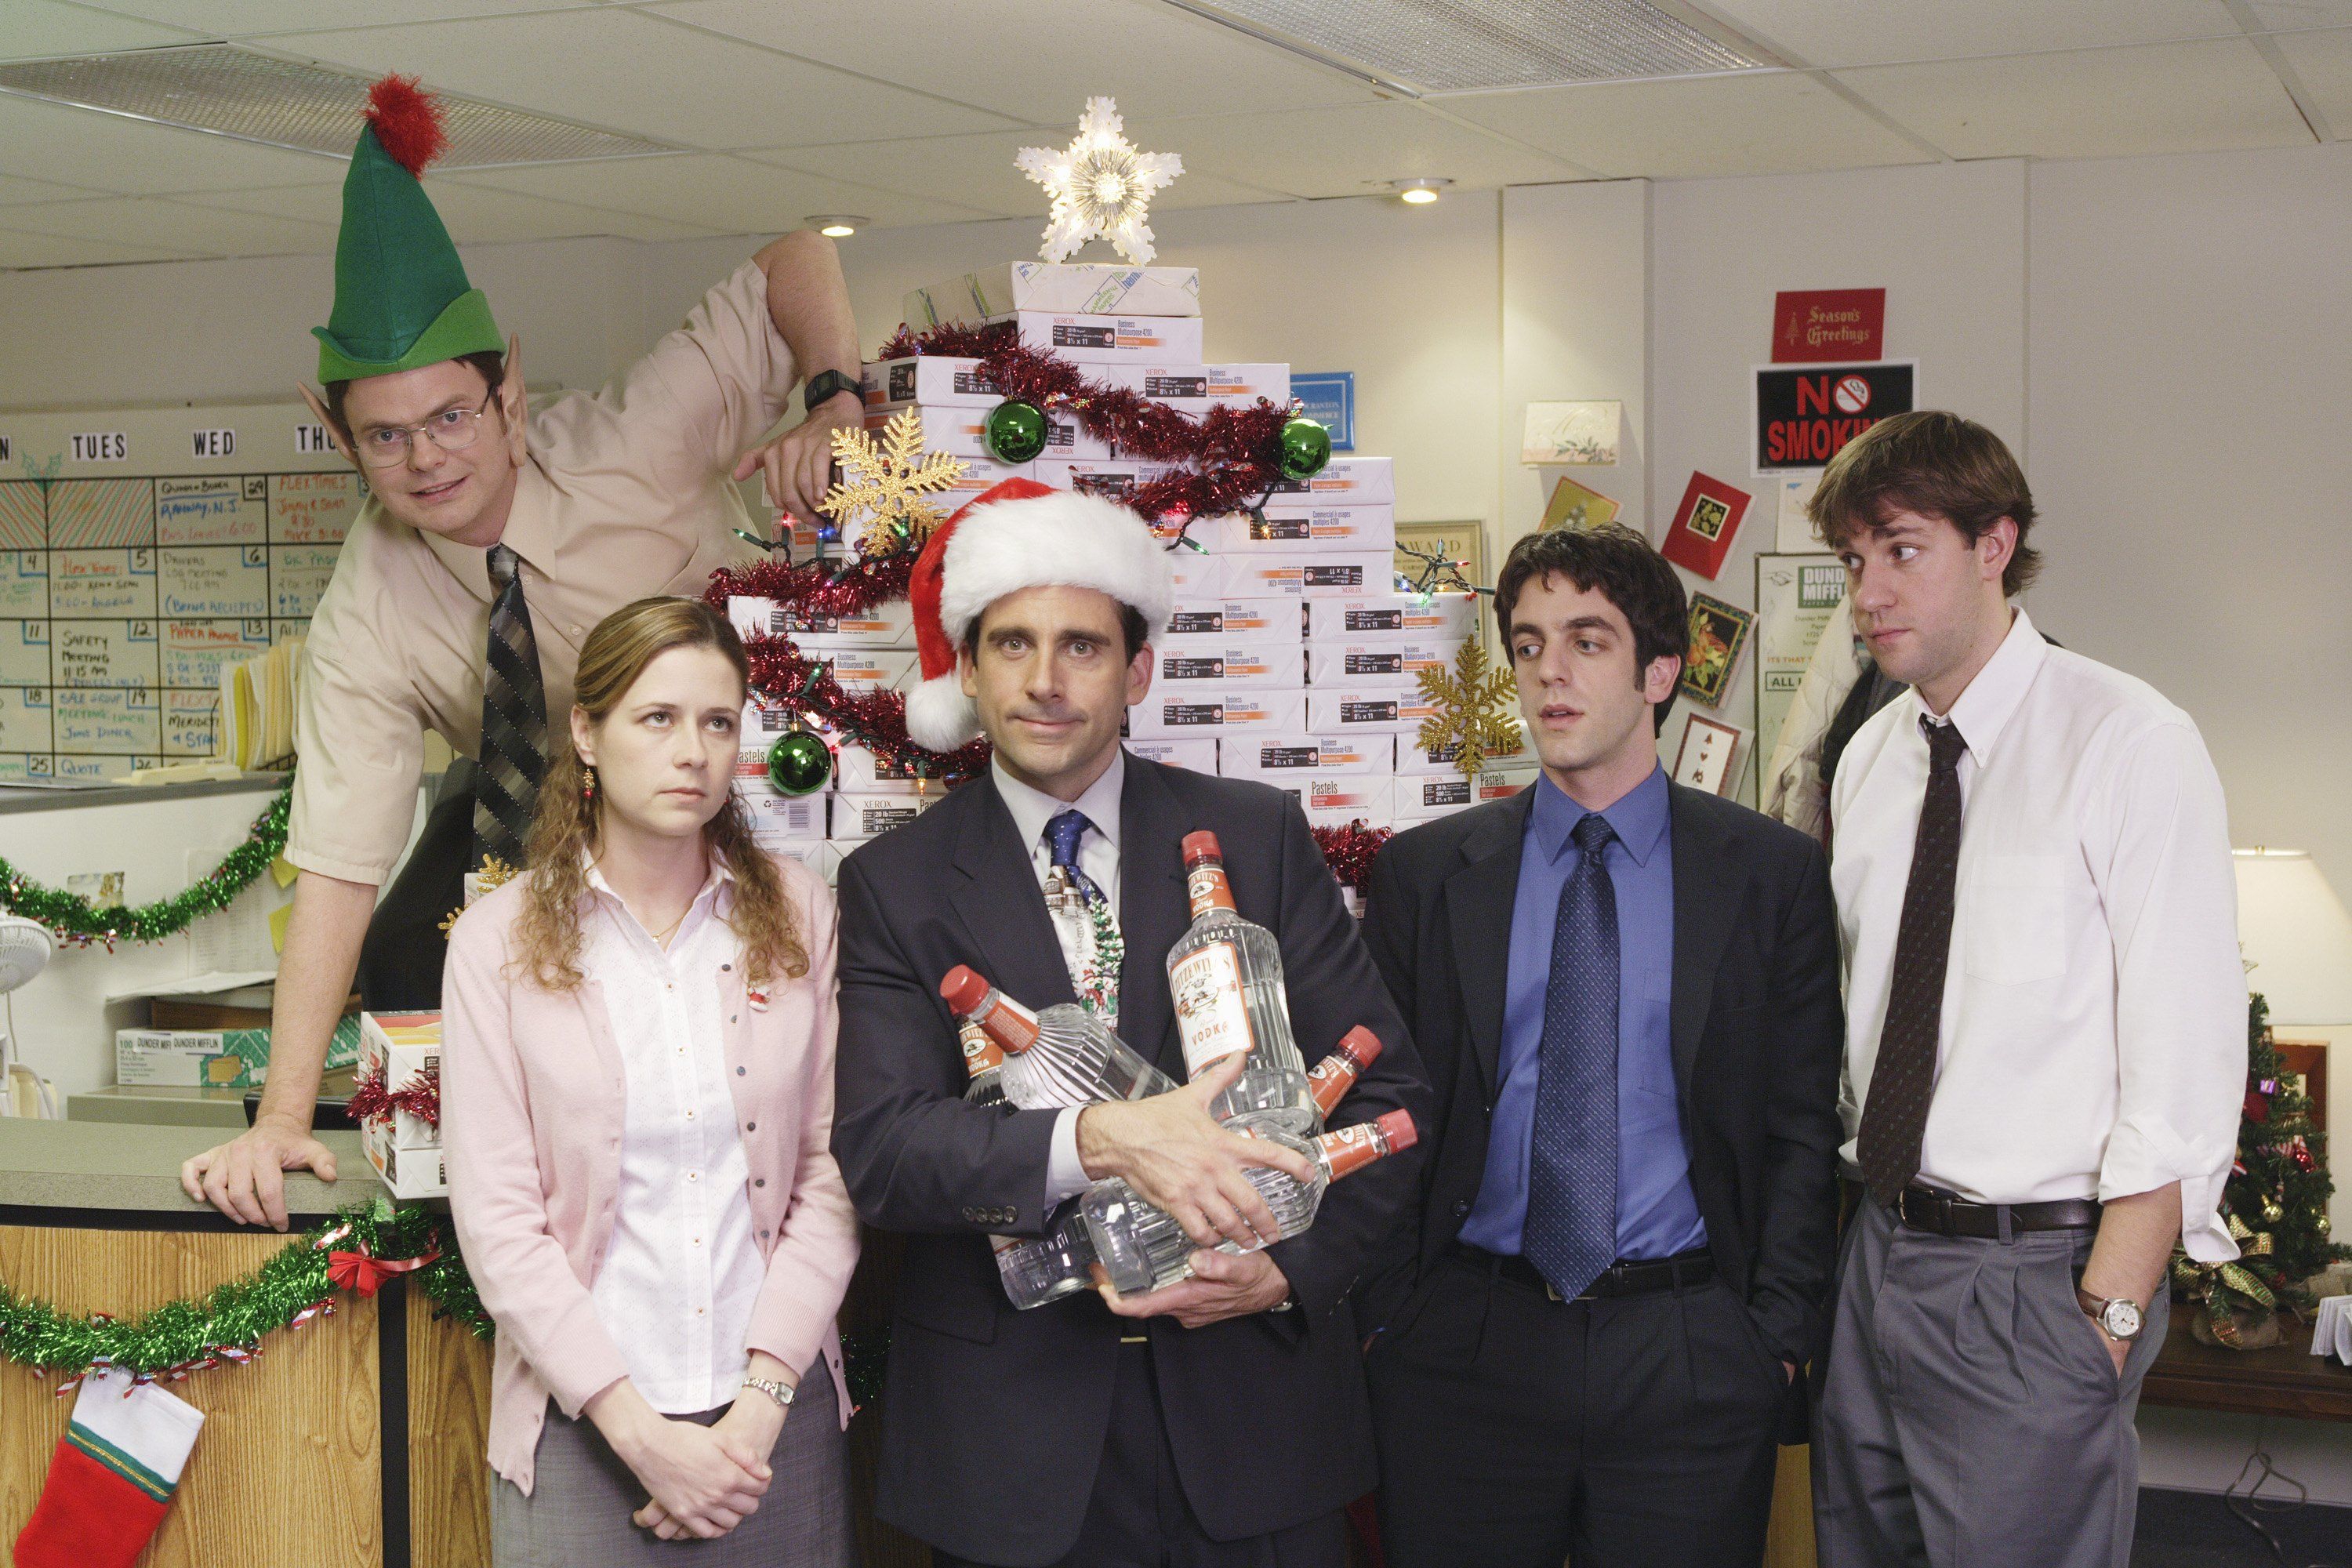 Office Holiday Party Do's and Don'ts - FYI